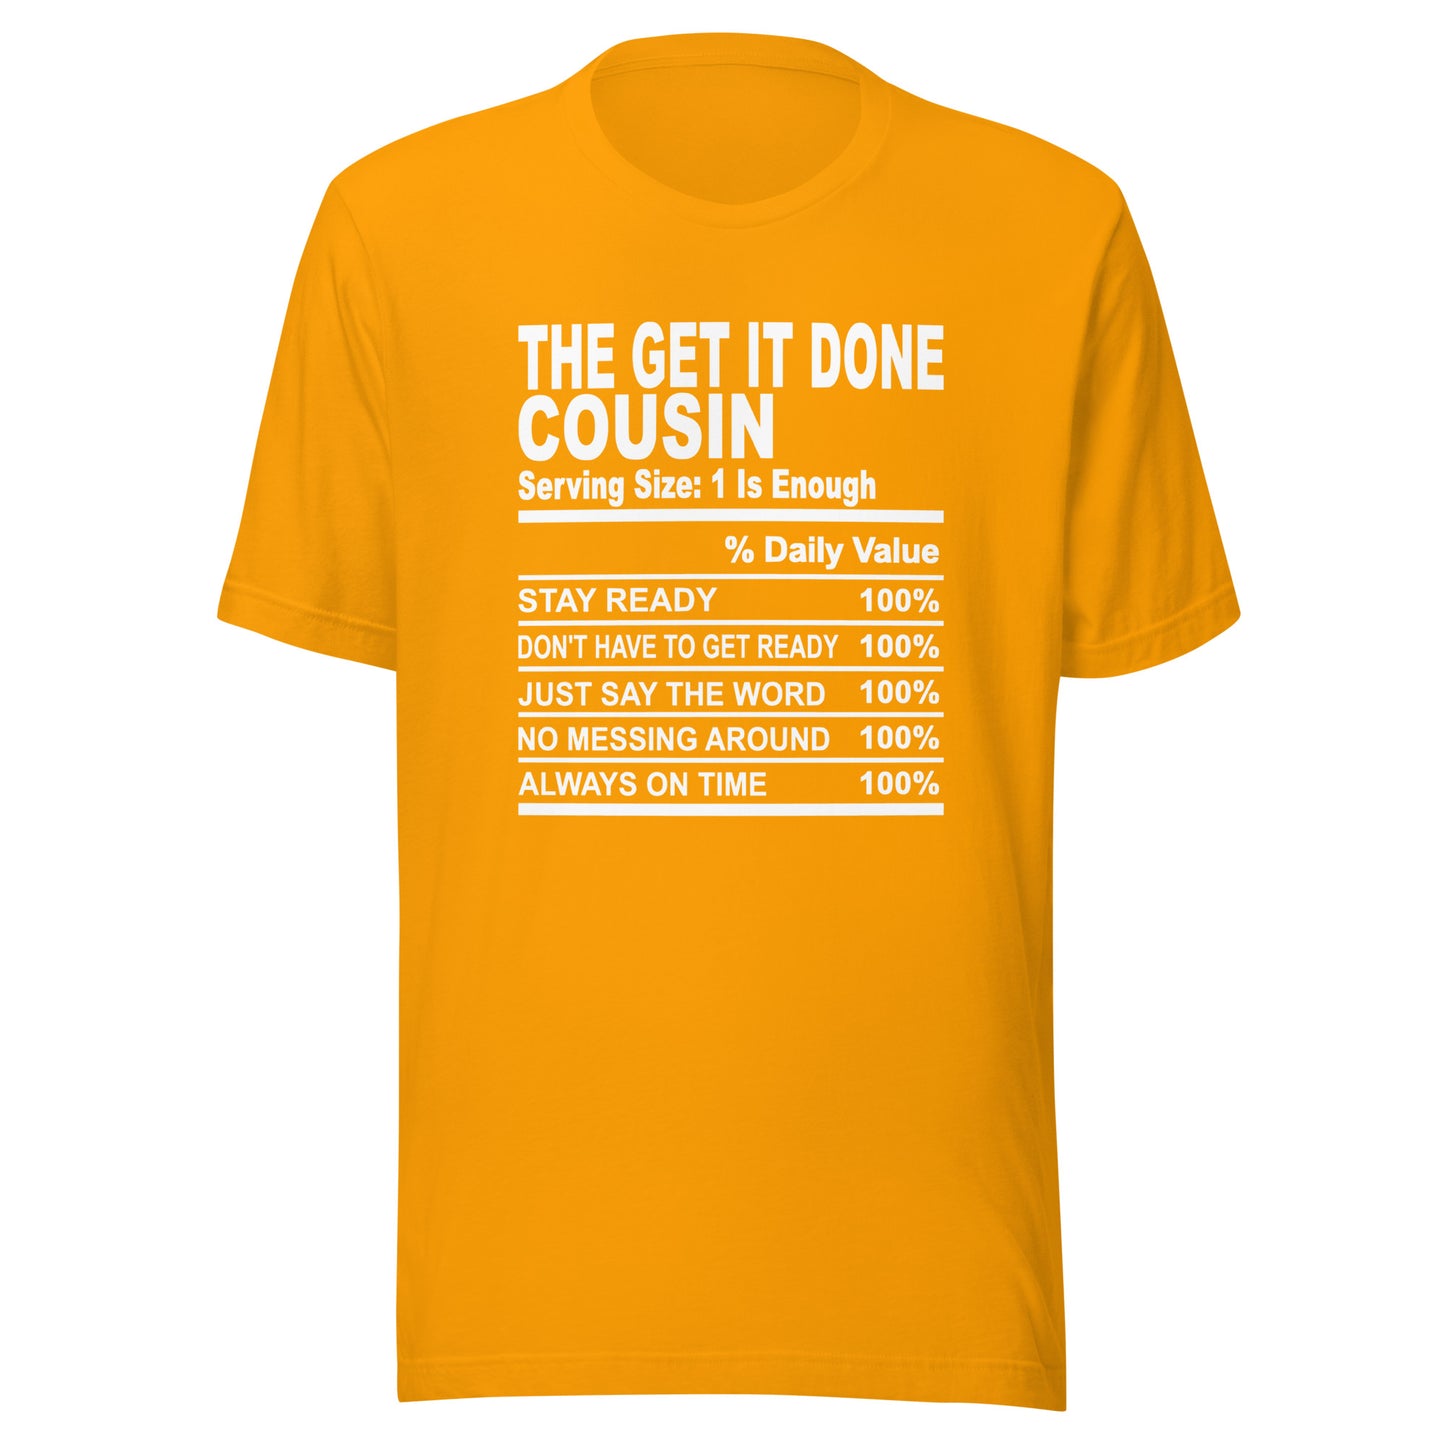 THE GET IT DONE COUSIN - S-M - Unisex T-Shirt (white print)